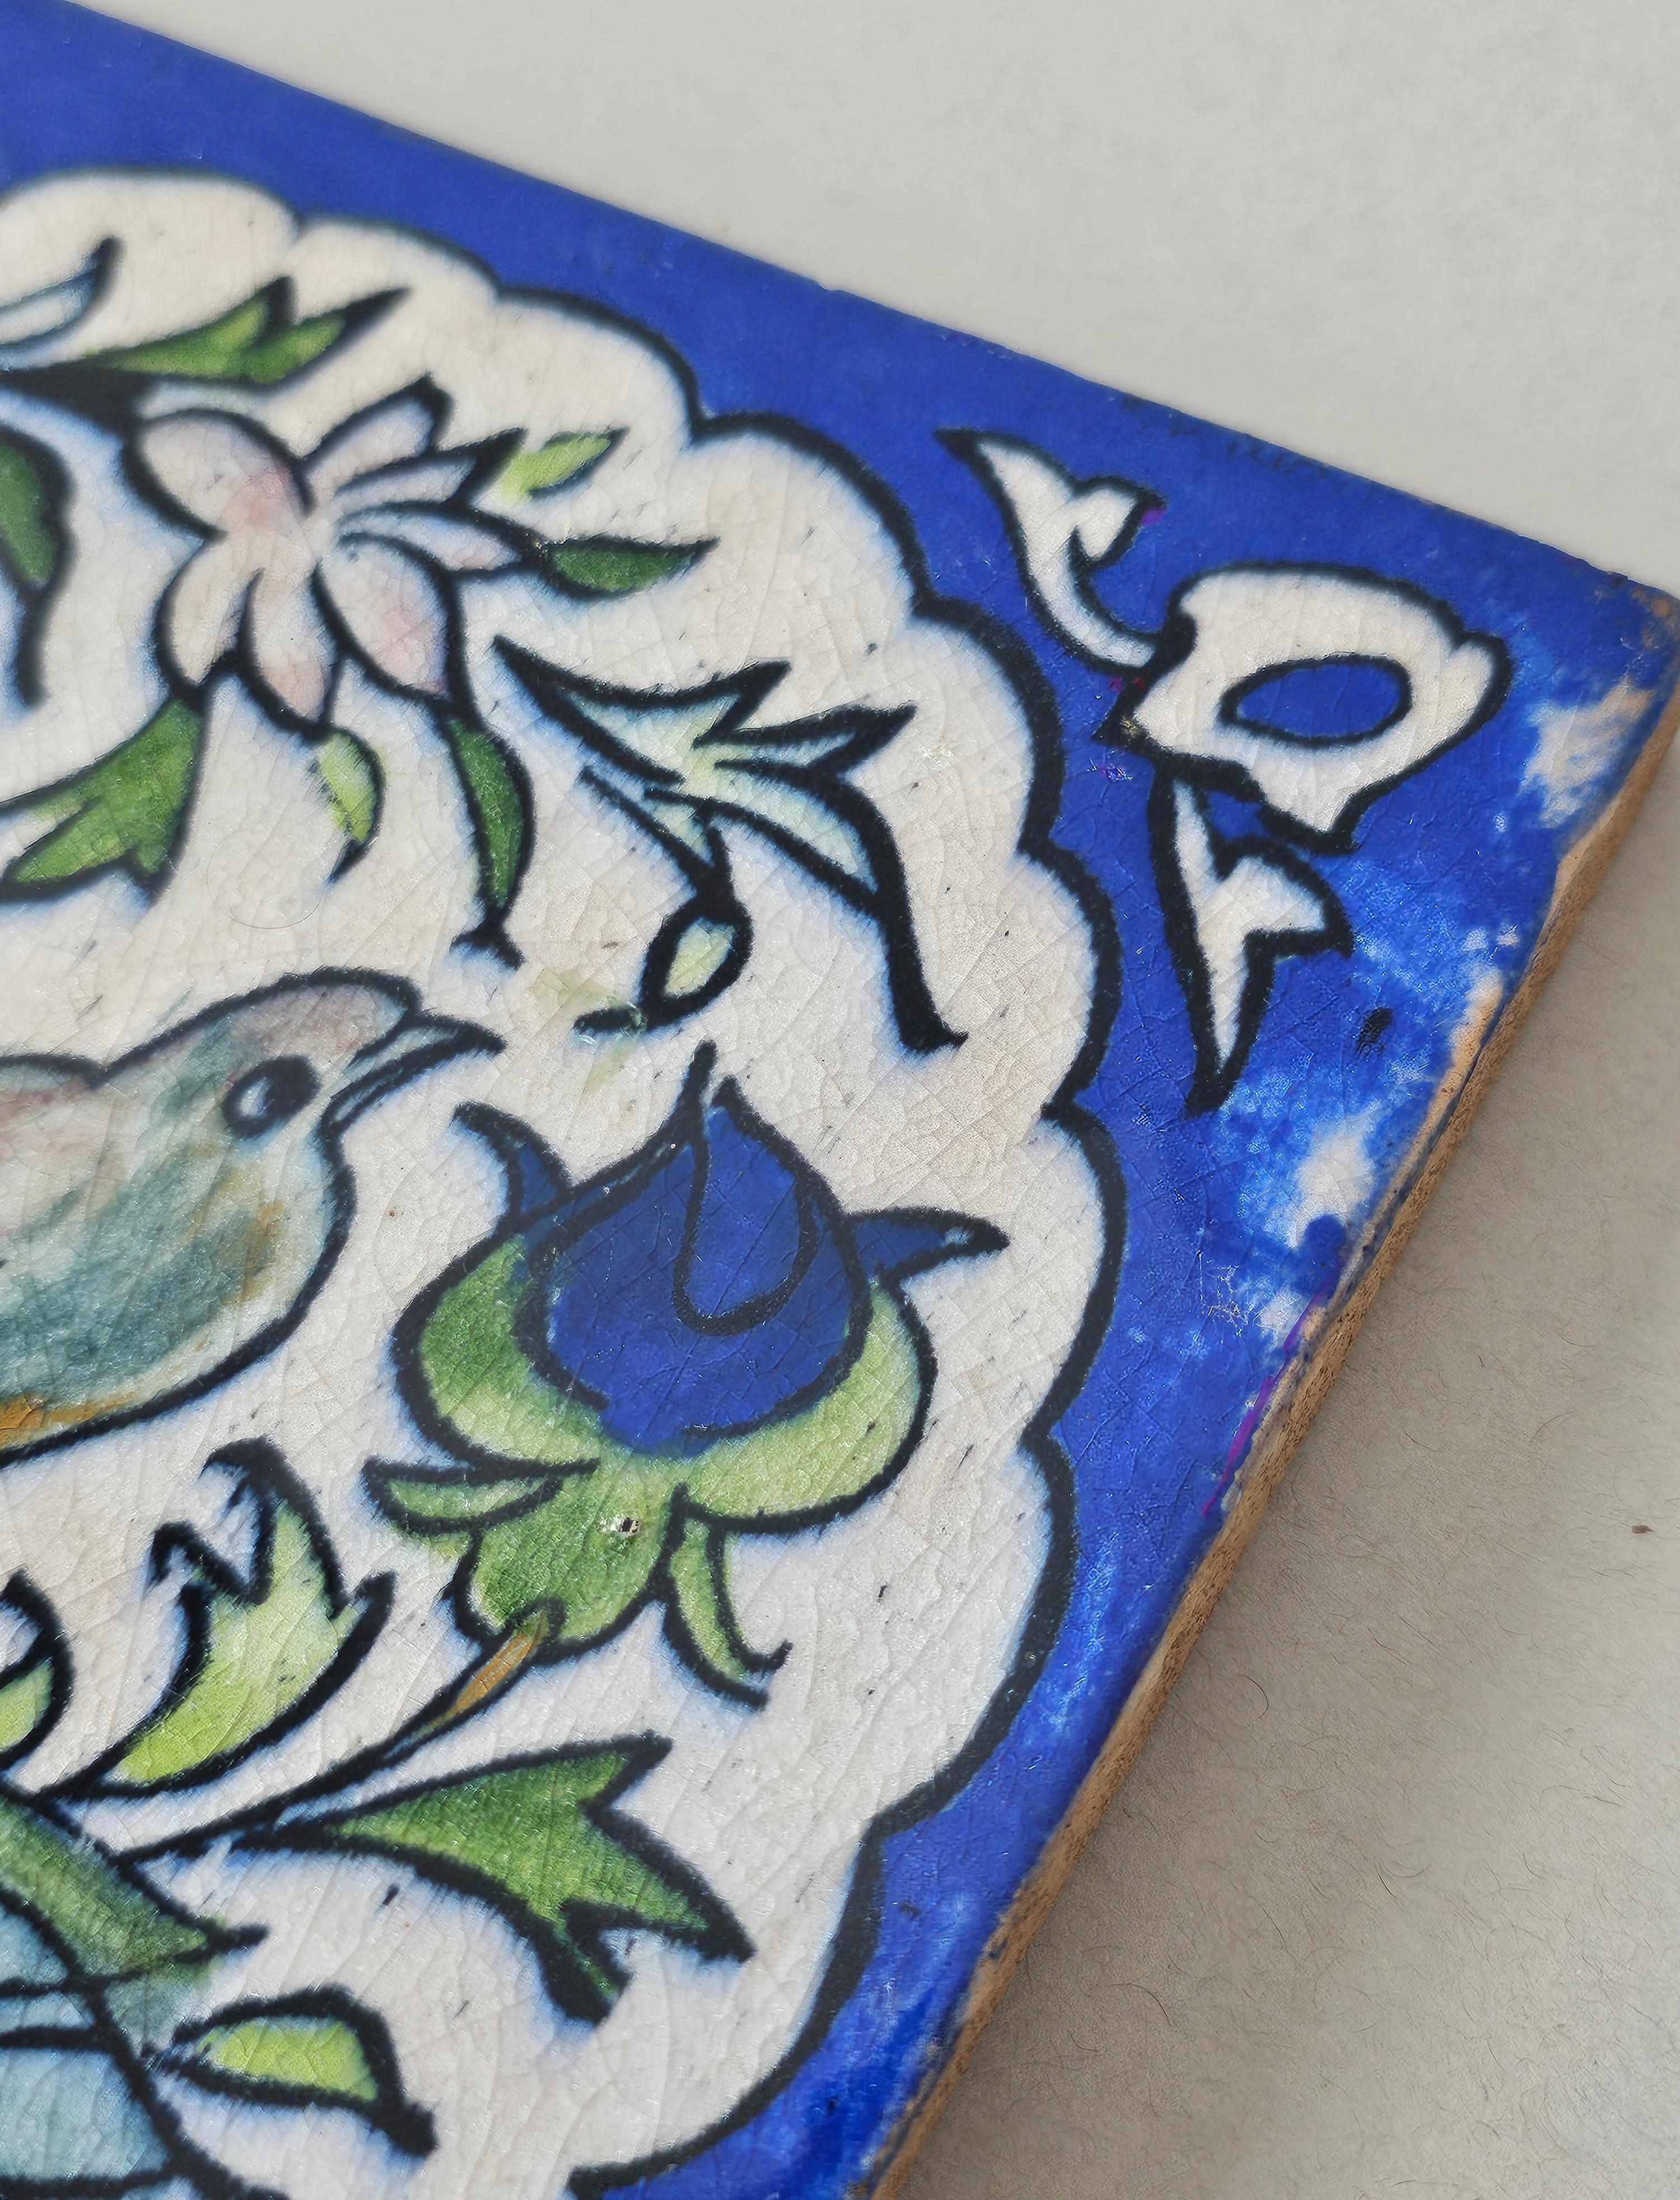 Hand-Crafted 19th Century Persian Hand Painted Ceramic Wall Tile  For Sale